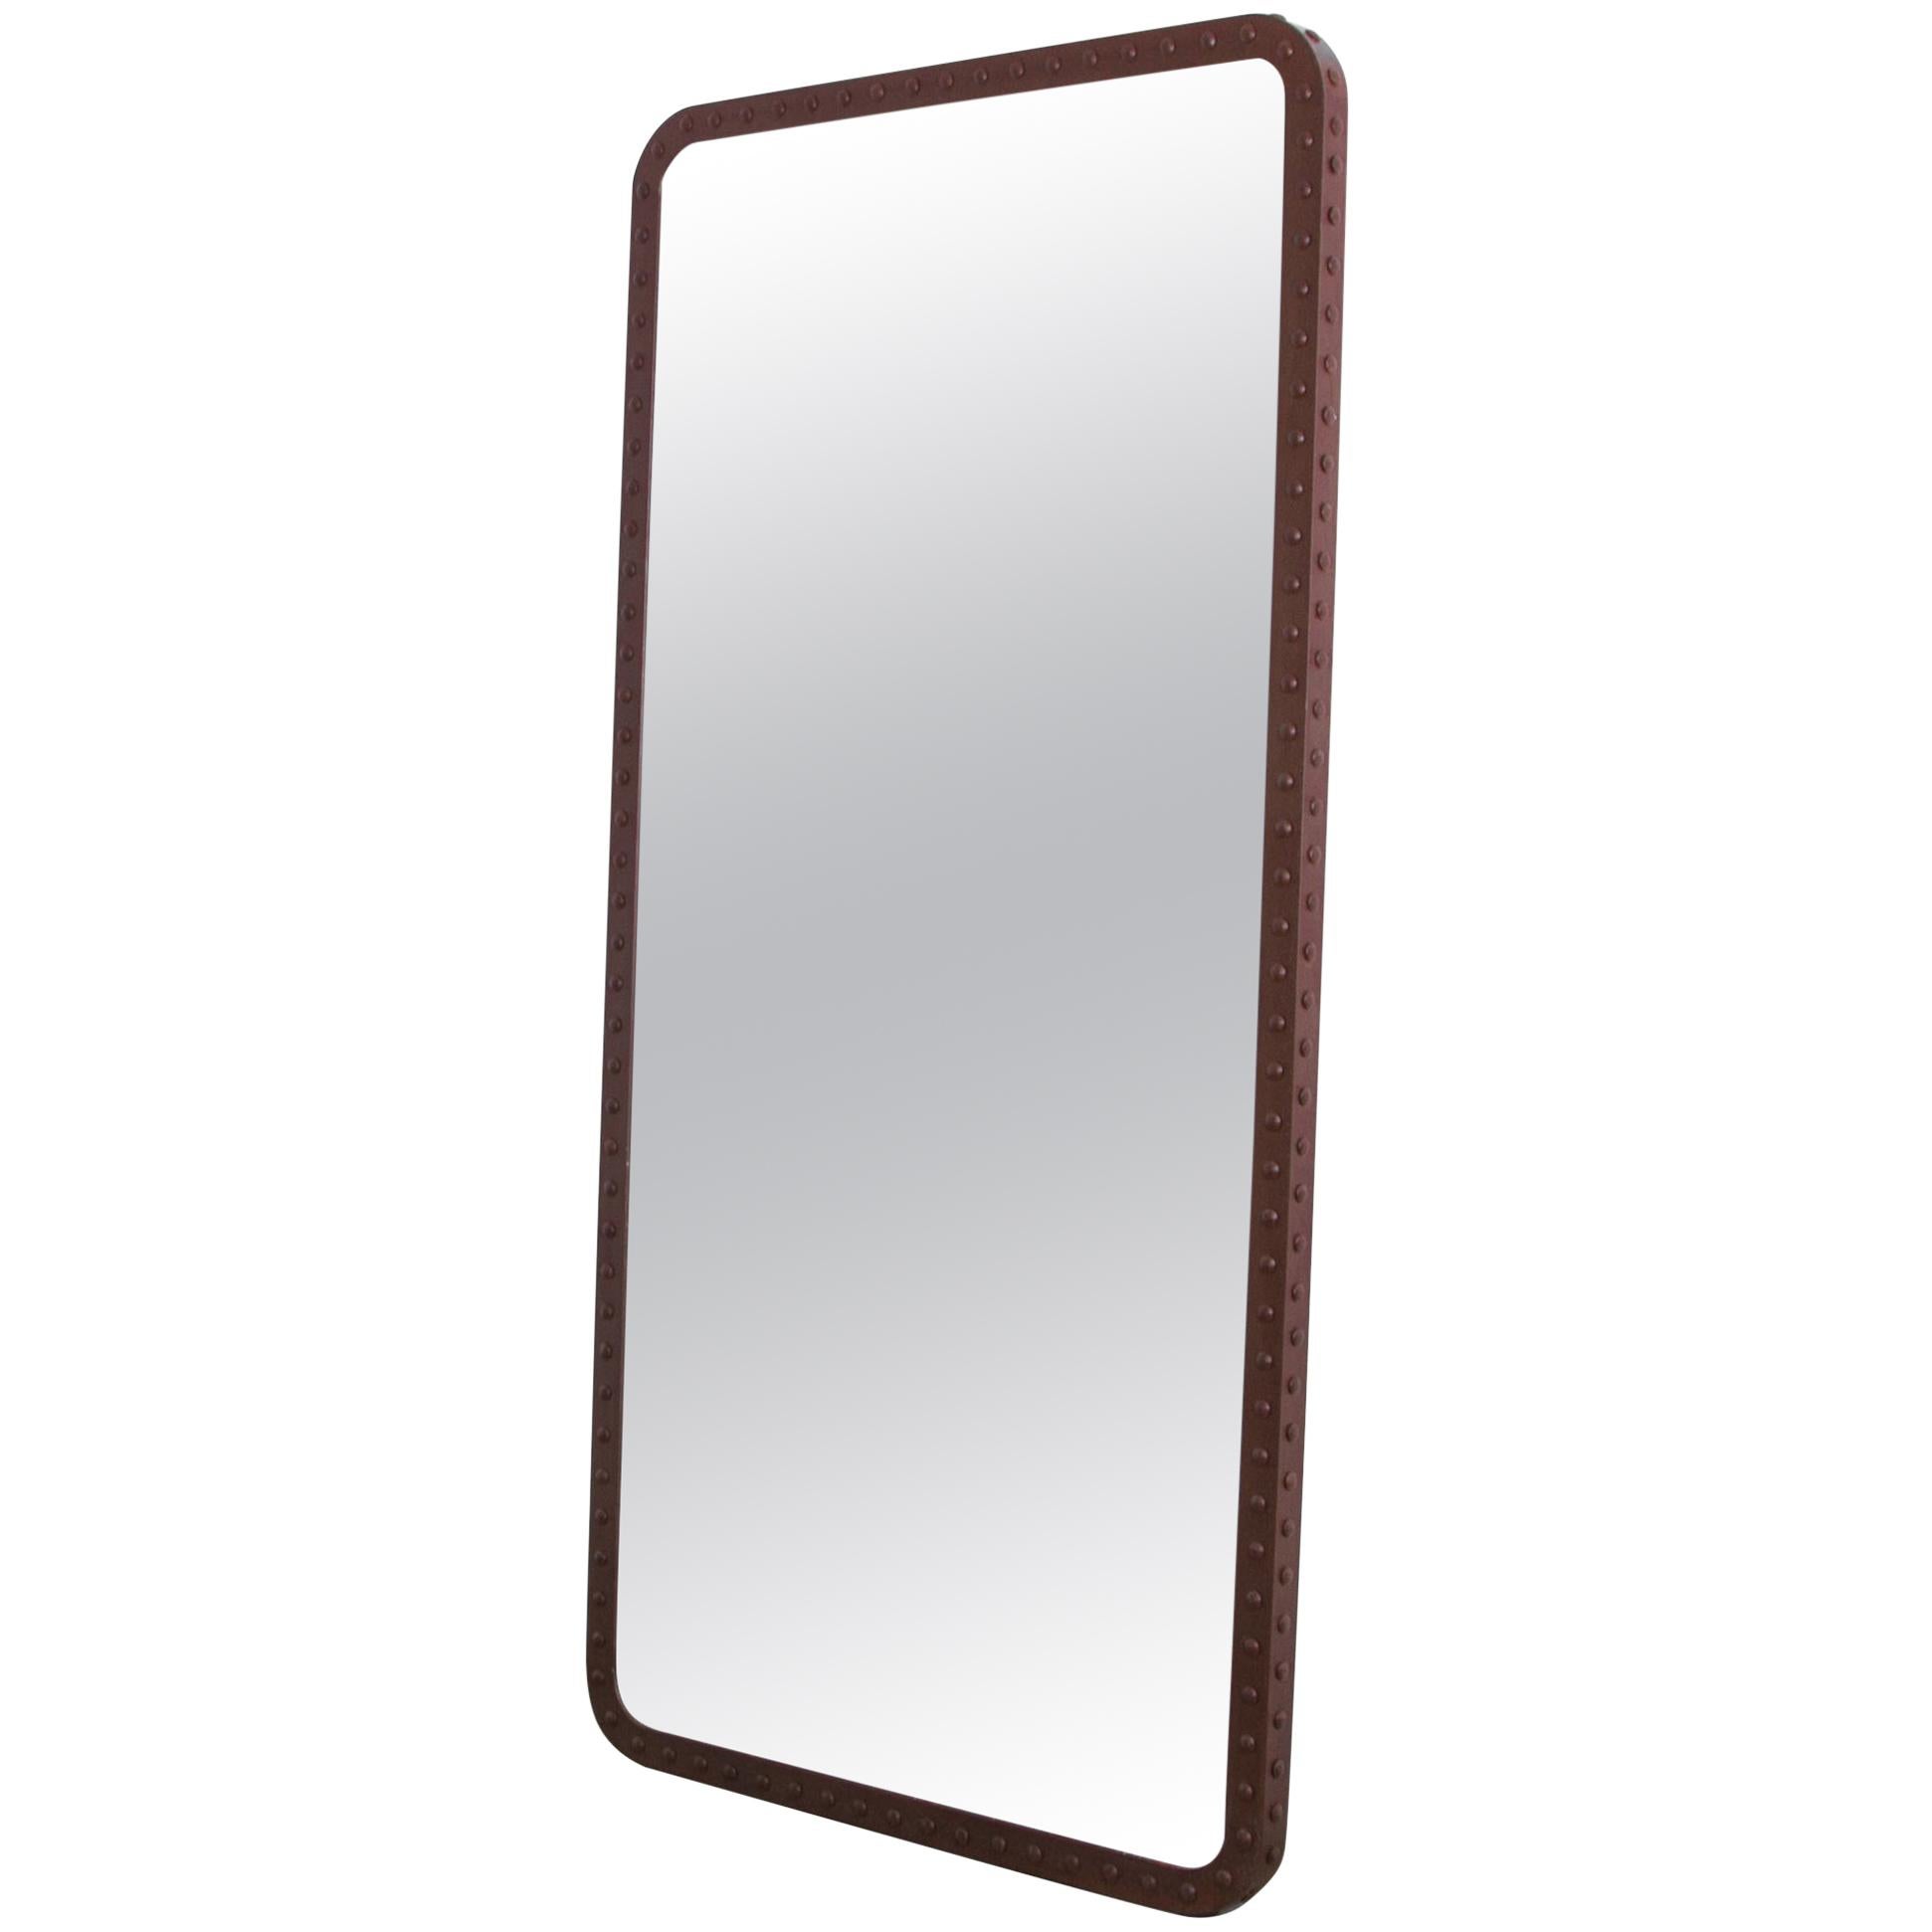 Riveted Iron Mirror